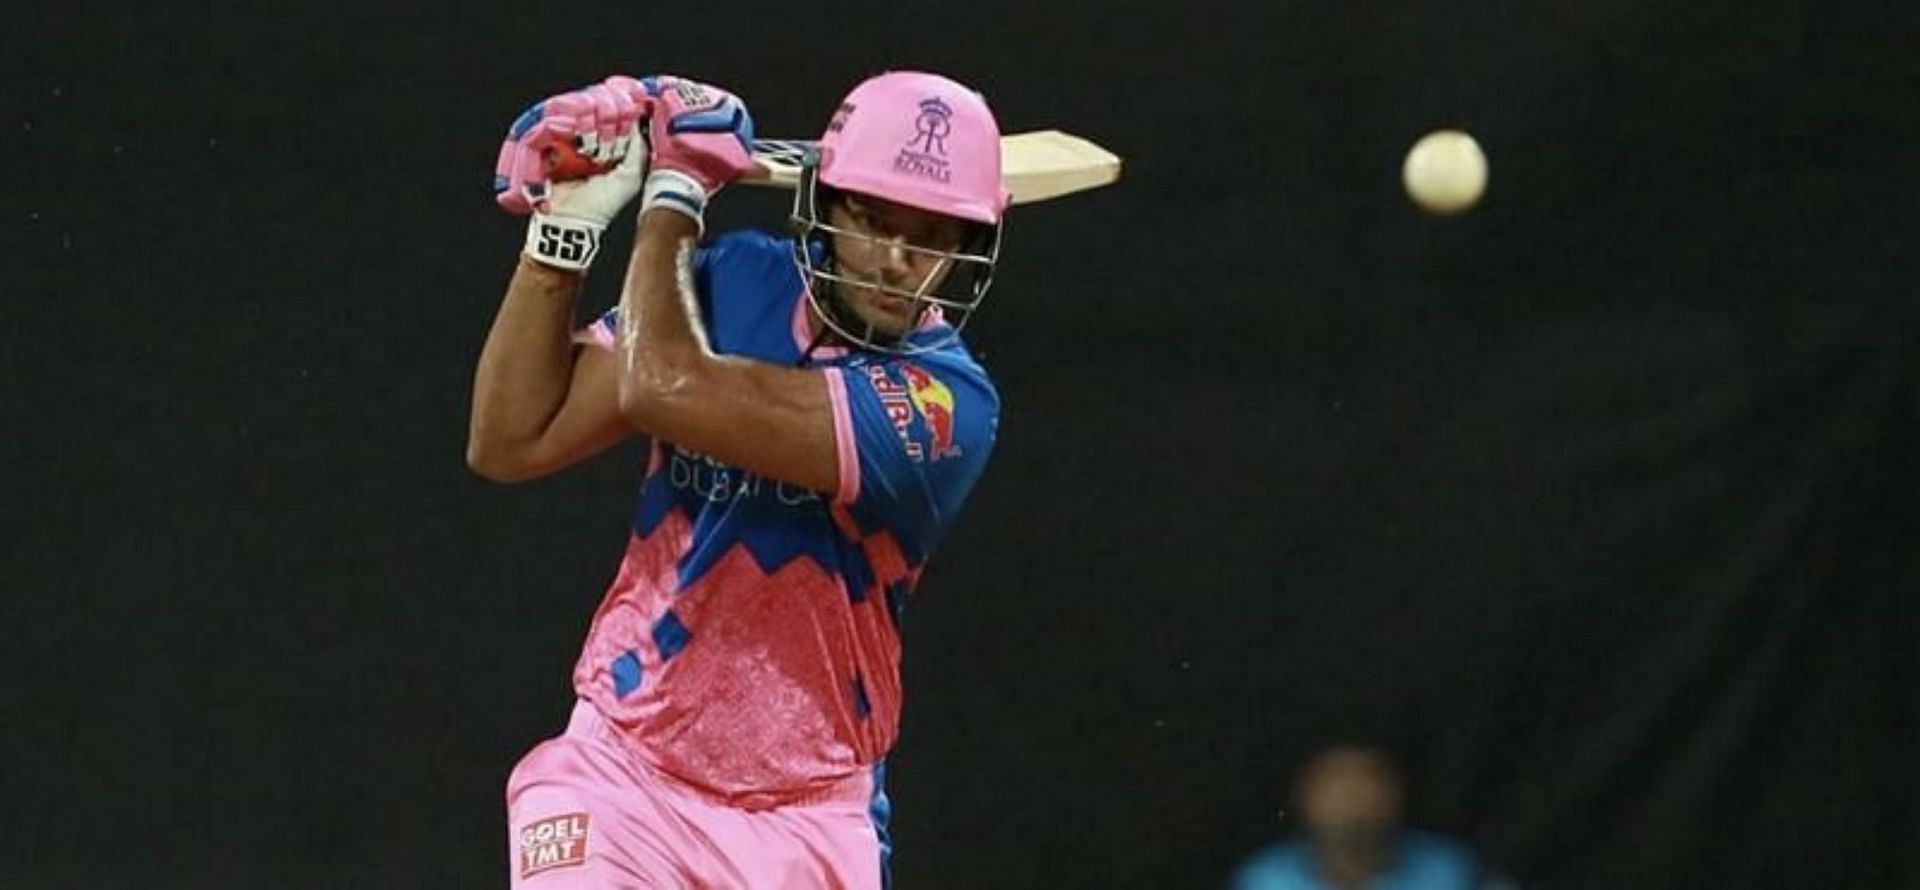 Former RR all-rounder Shivam Dube has come of his age since joining CSK